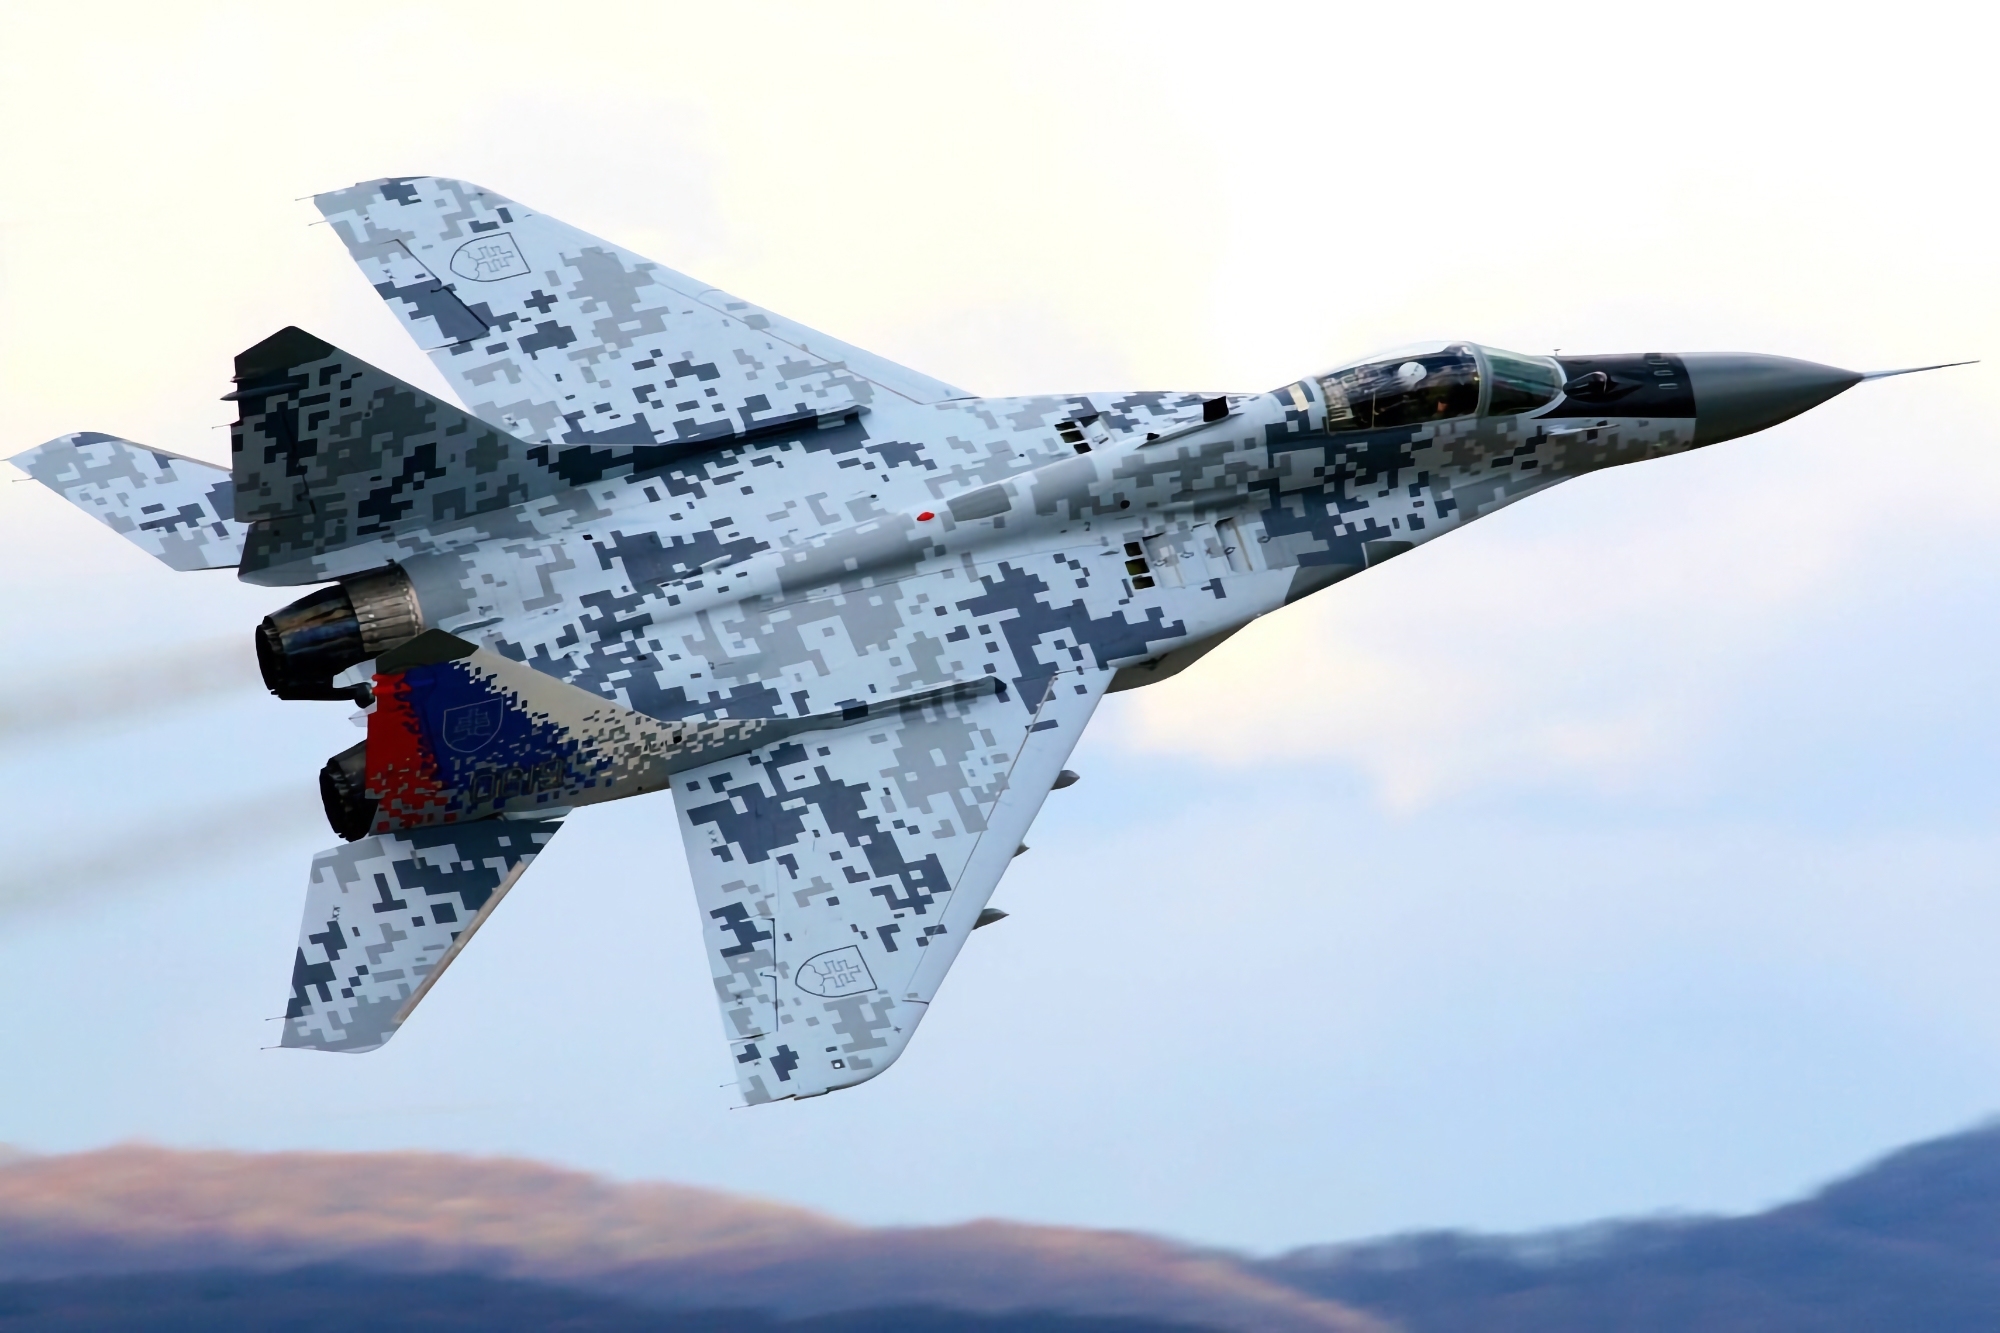 Slovakia is ready to transfer MiG-29 fighters to Ukraine